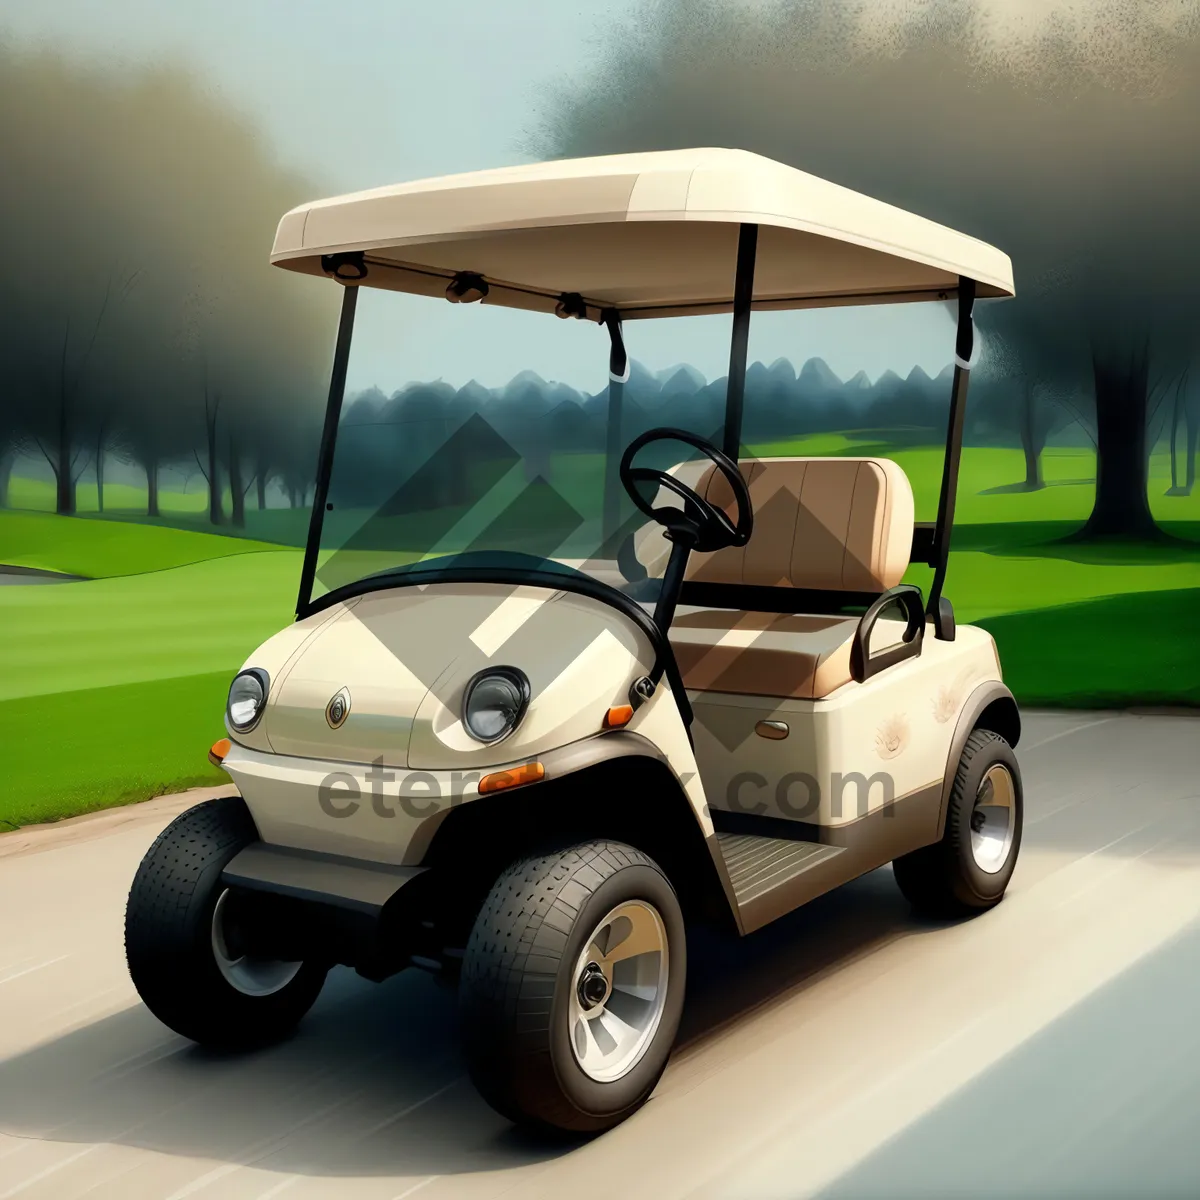 Picture of Golf Cart on Green Course: Driving in Style